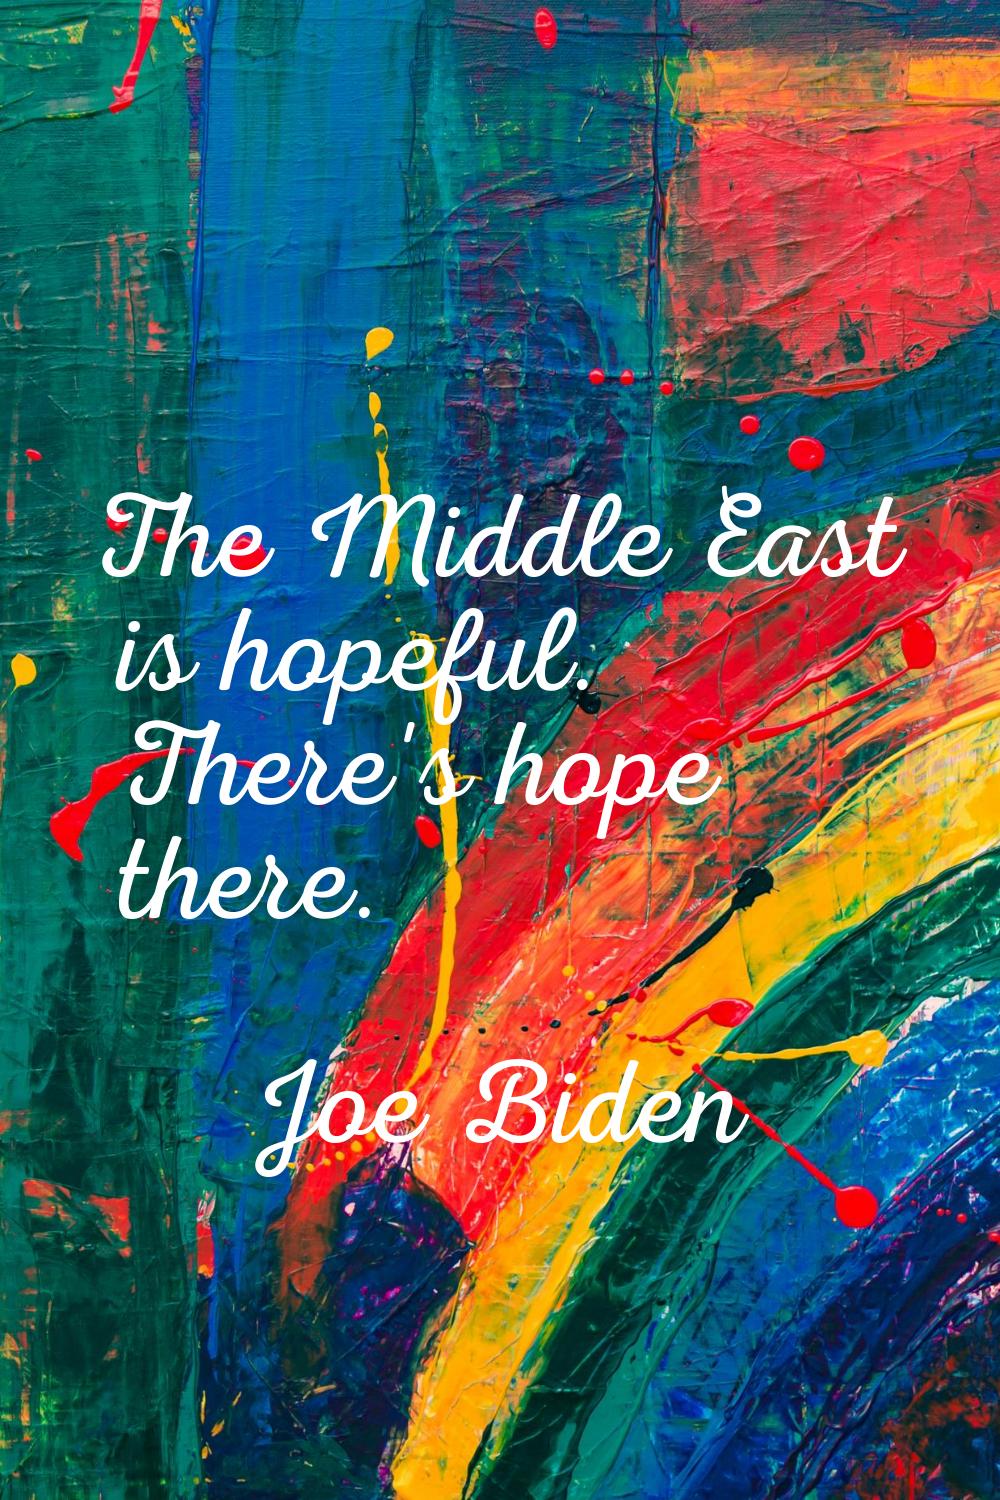 The Middle East is hopeful. There's hope there.